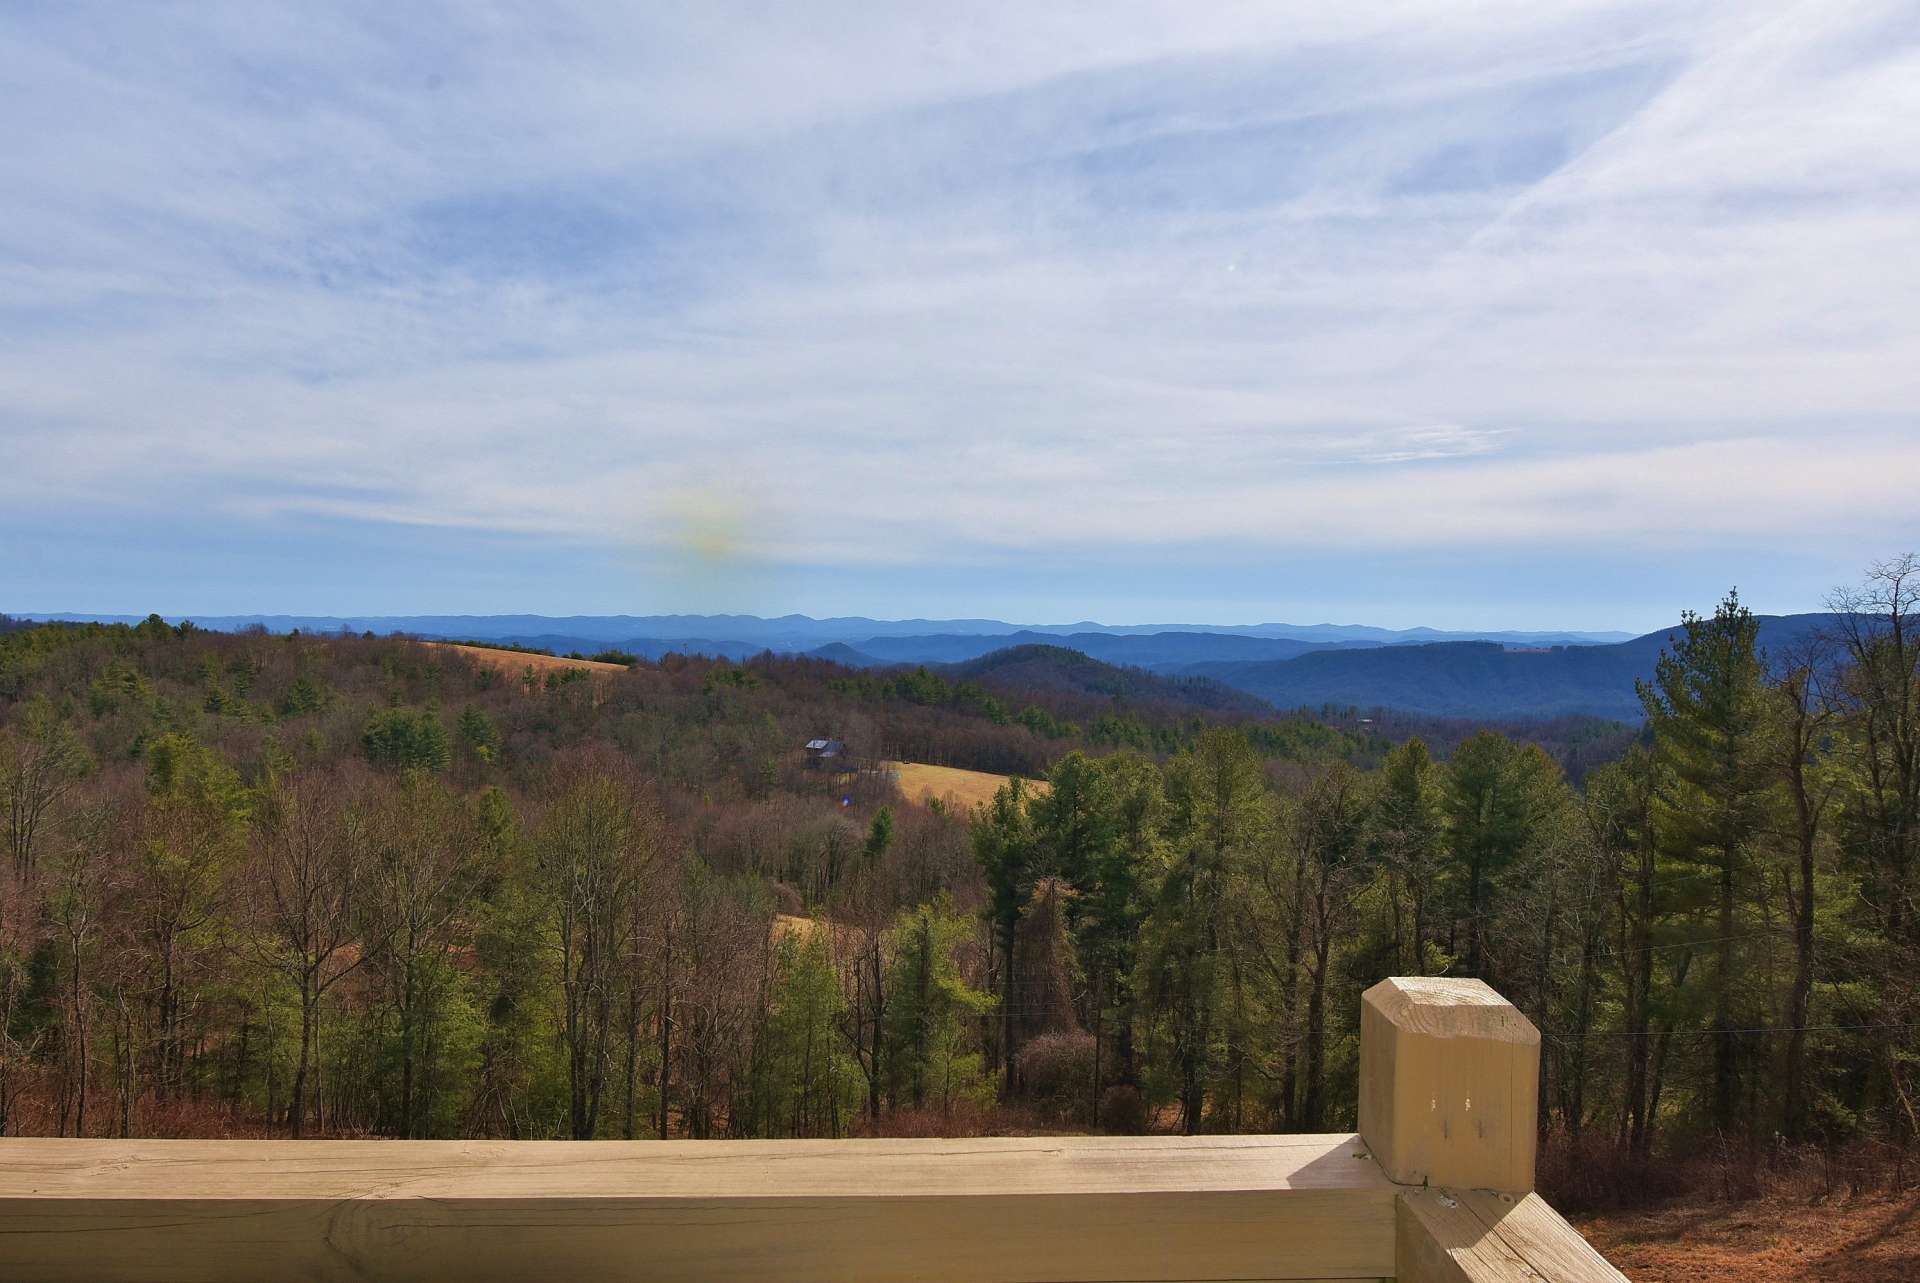 You will enjoy the Blue Ridge Parkway vista views from the back deck.